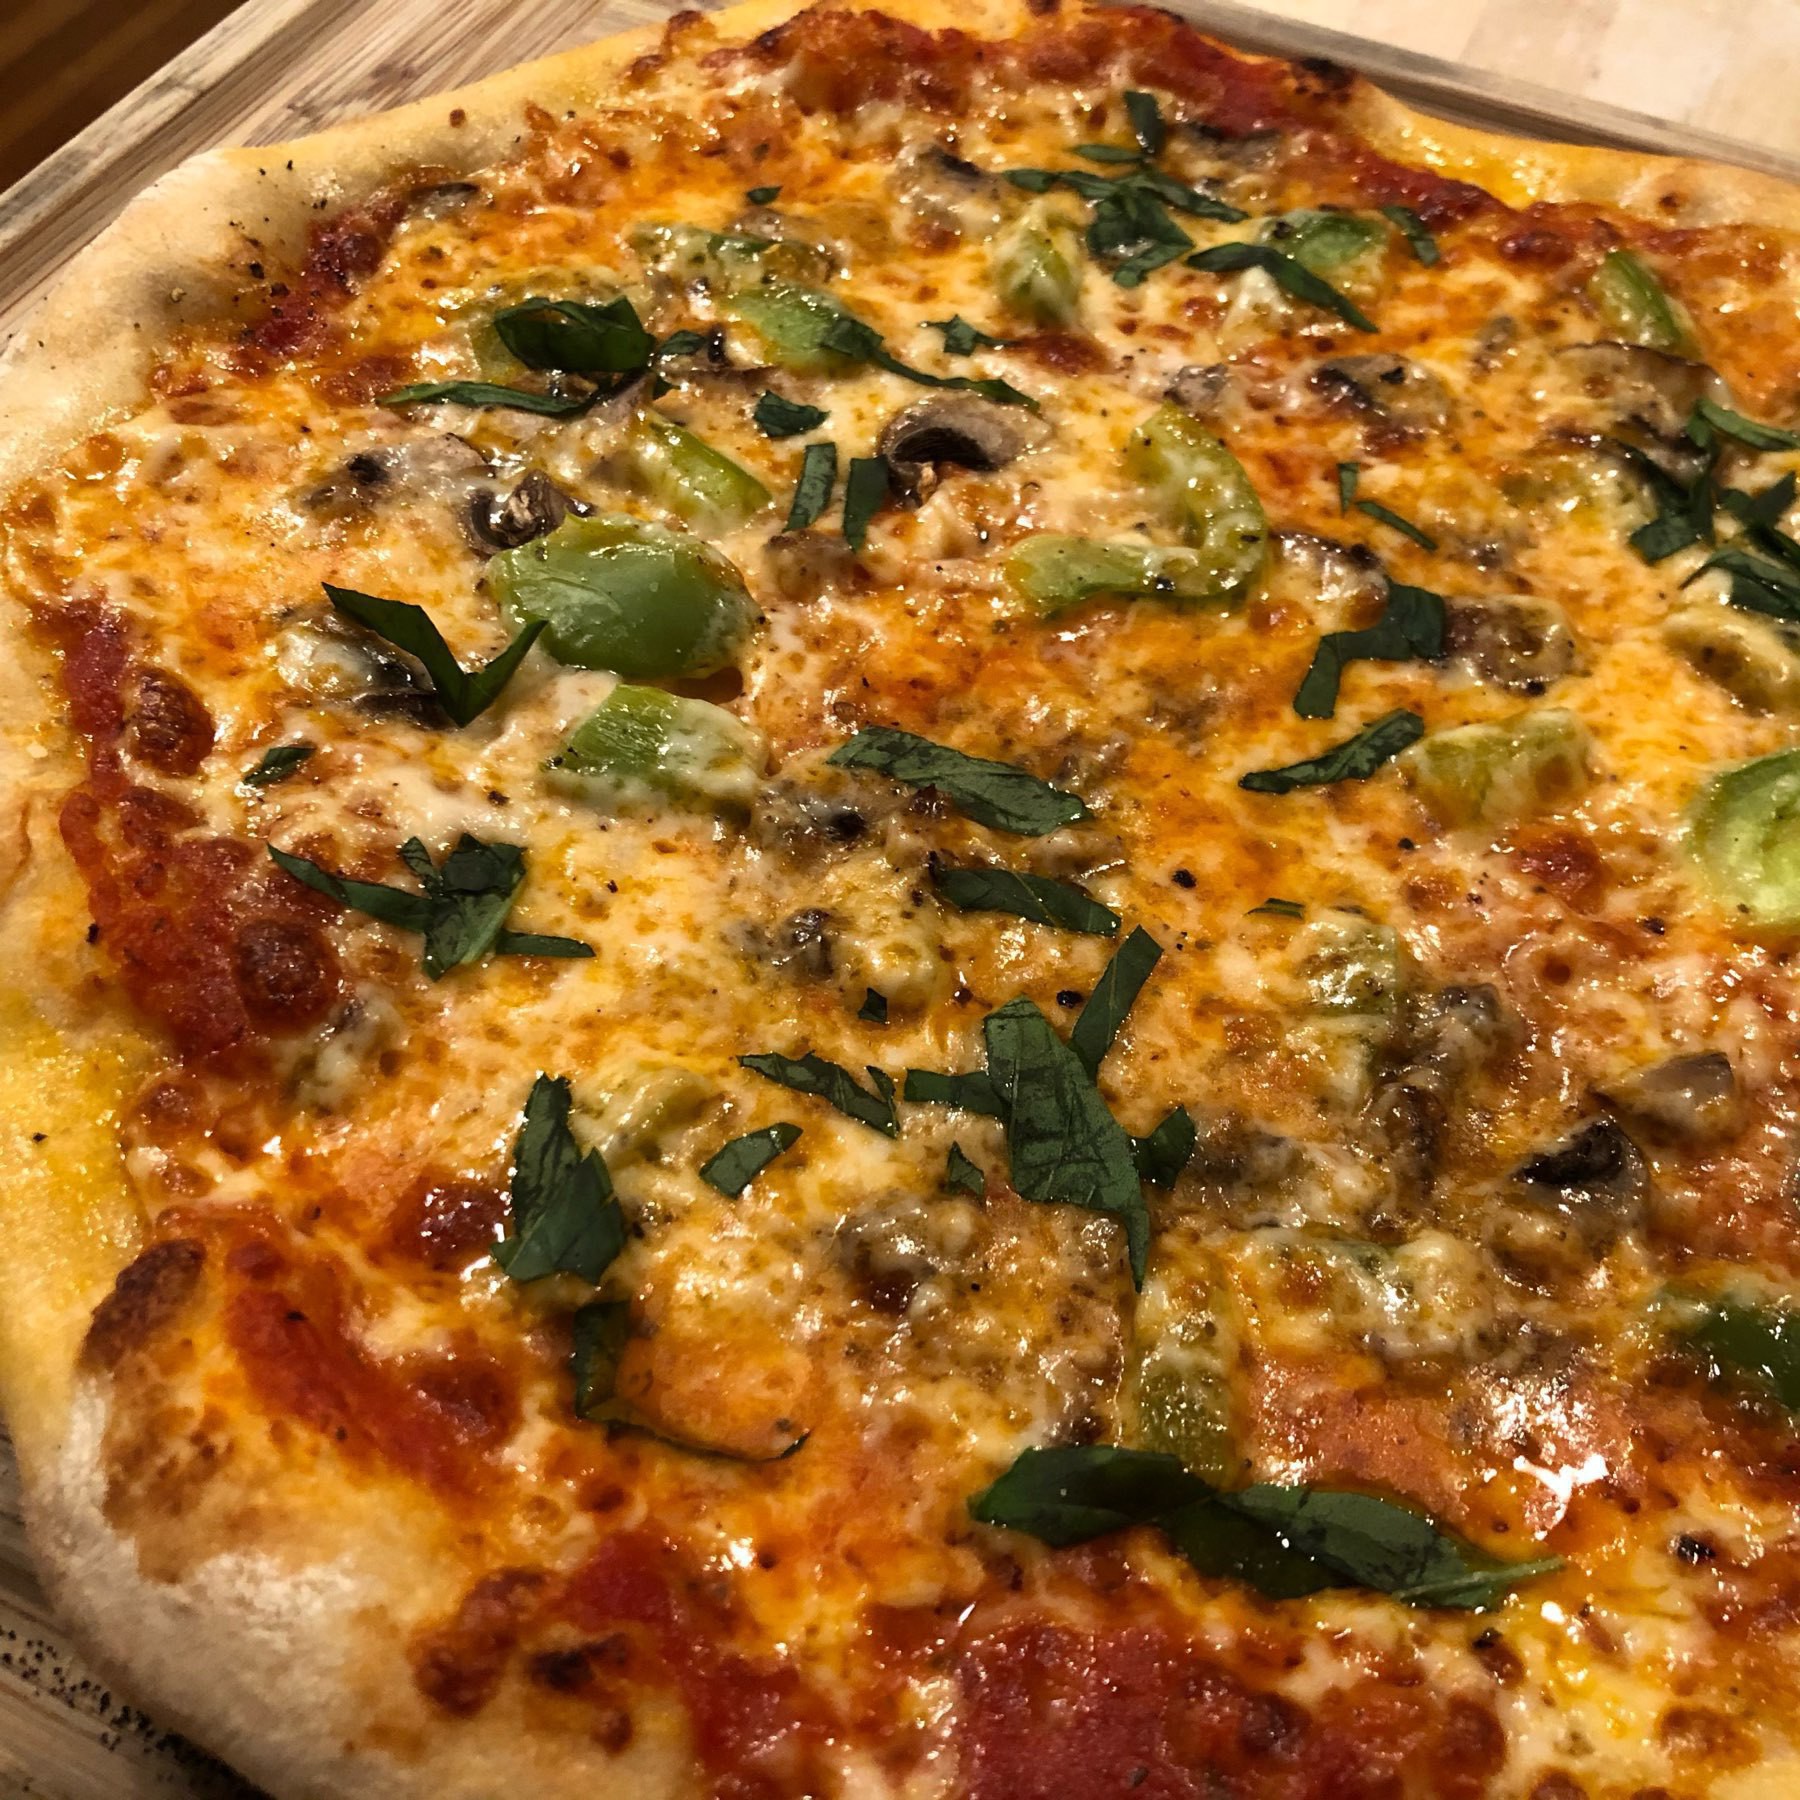 Fresh-baked pizza with bell pepper, mushroom, and basil.